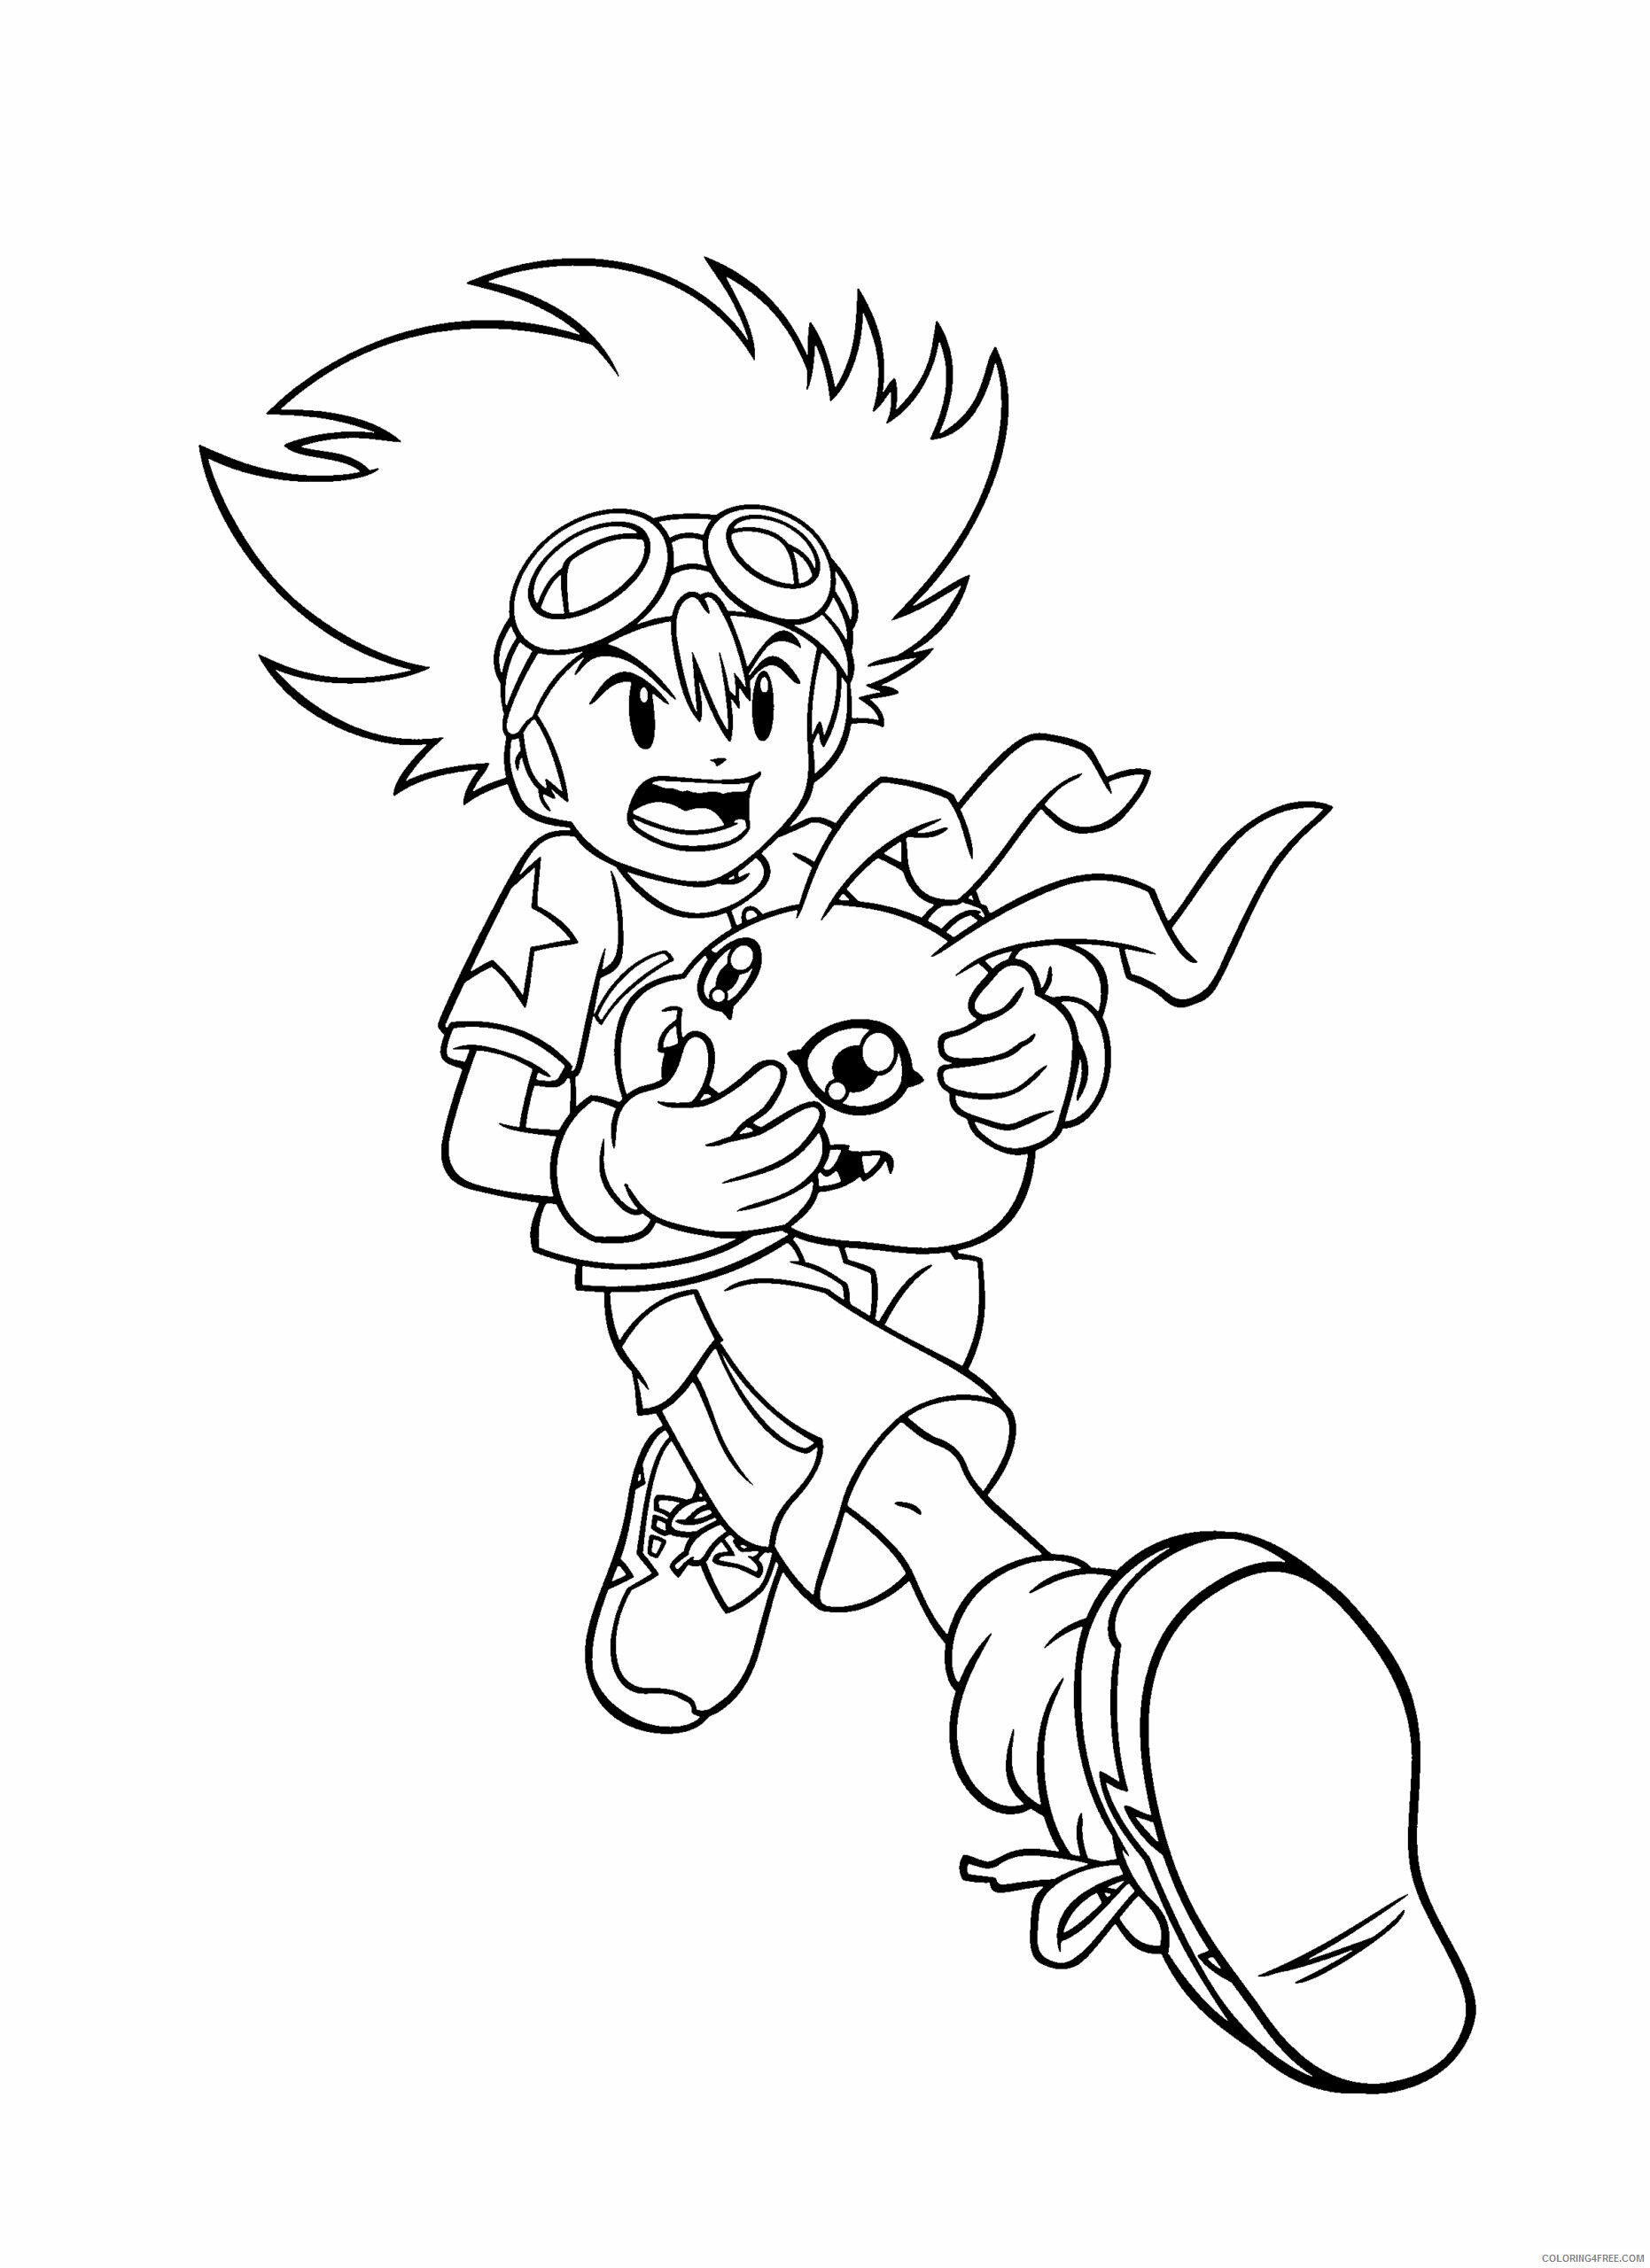 Digimon Printable Coloring Pages Anime digimon JKvd8 2021 0176 Coloring4free